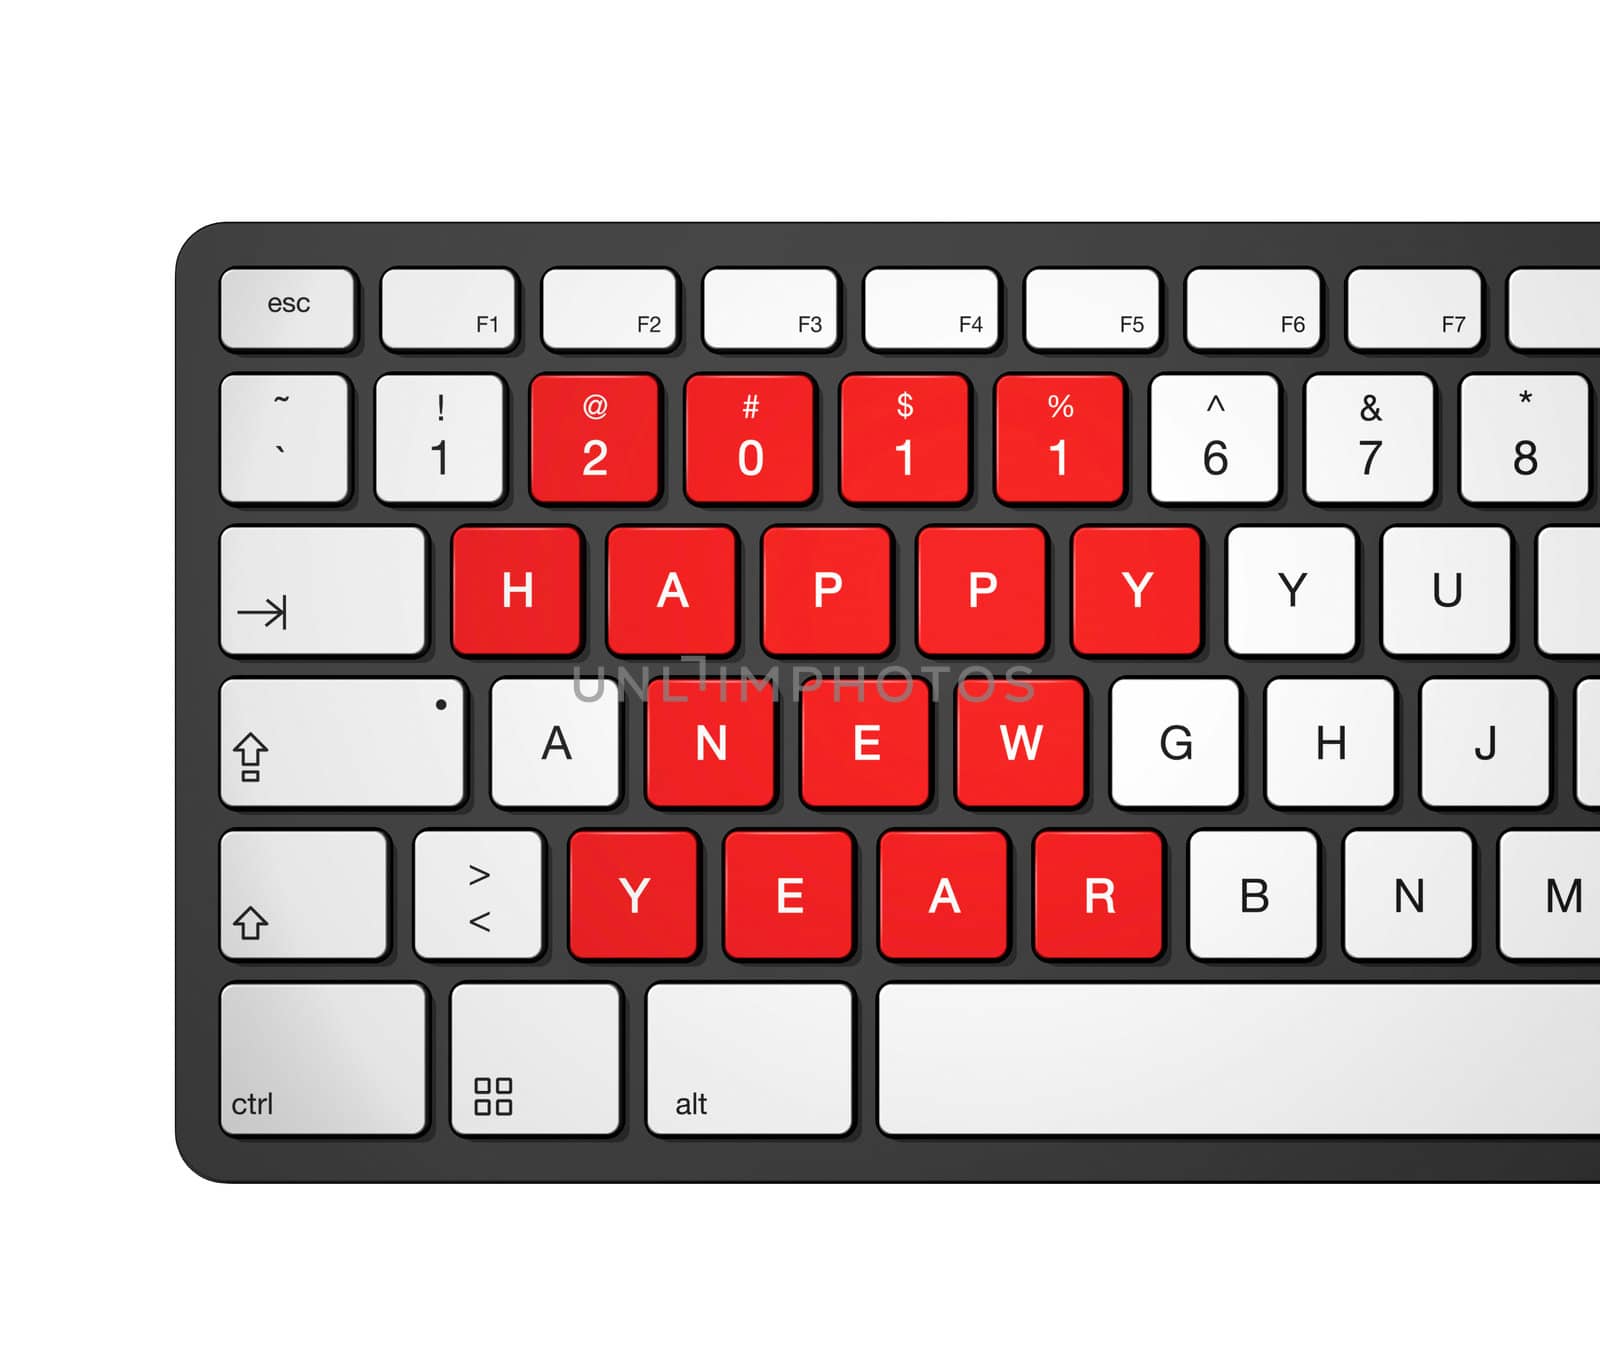 New year 2011 message on a computer keyboard, 3d illustration isolated on white